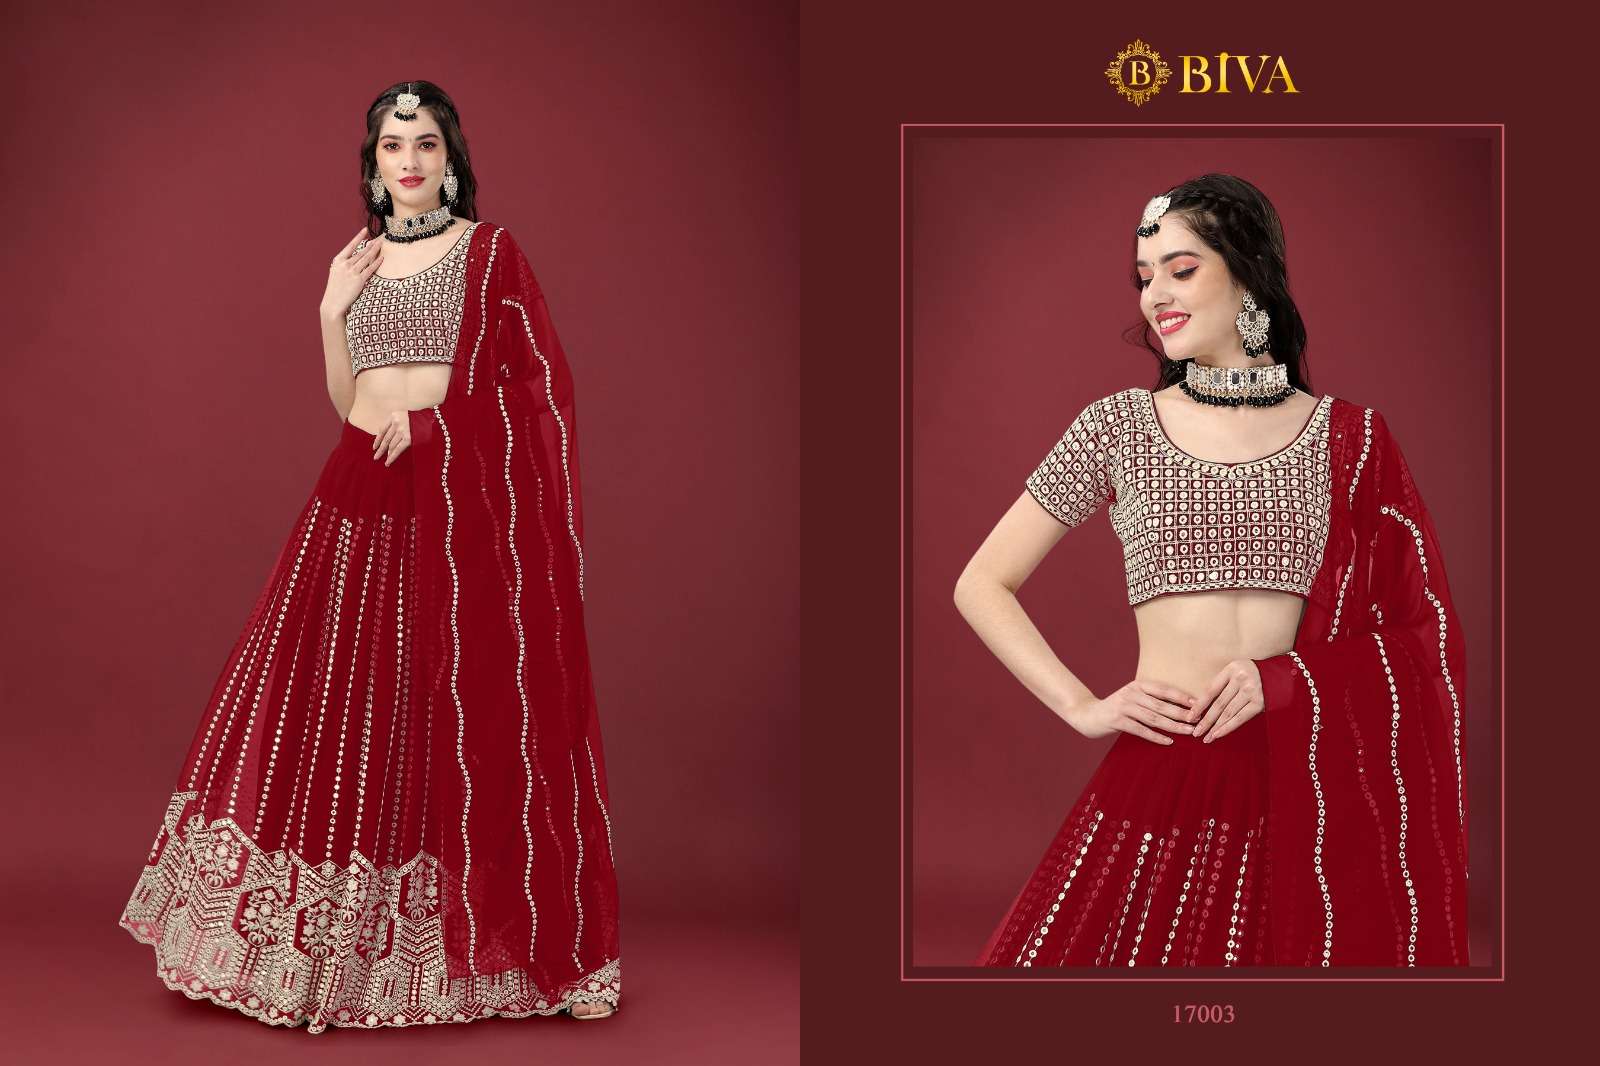 Monalisaa Vol-7 By Biva 17001 To 17005 Series Indian Traditional Beautiful Stylish Designer Banarasi Silk Jacquard Embroidered Party Wear Faux Georgette Lehengas At Wholesale Price